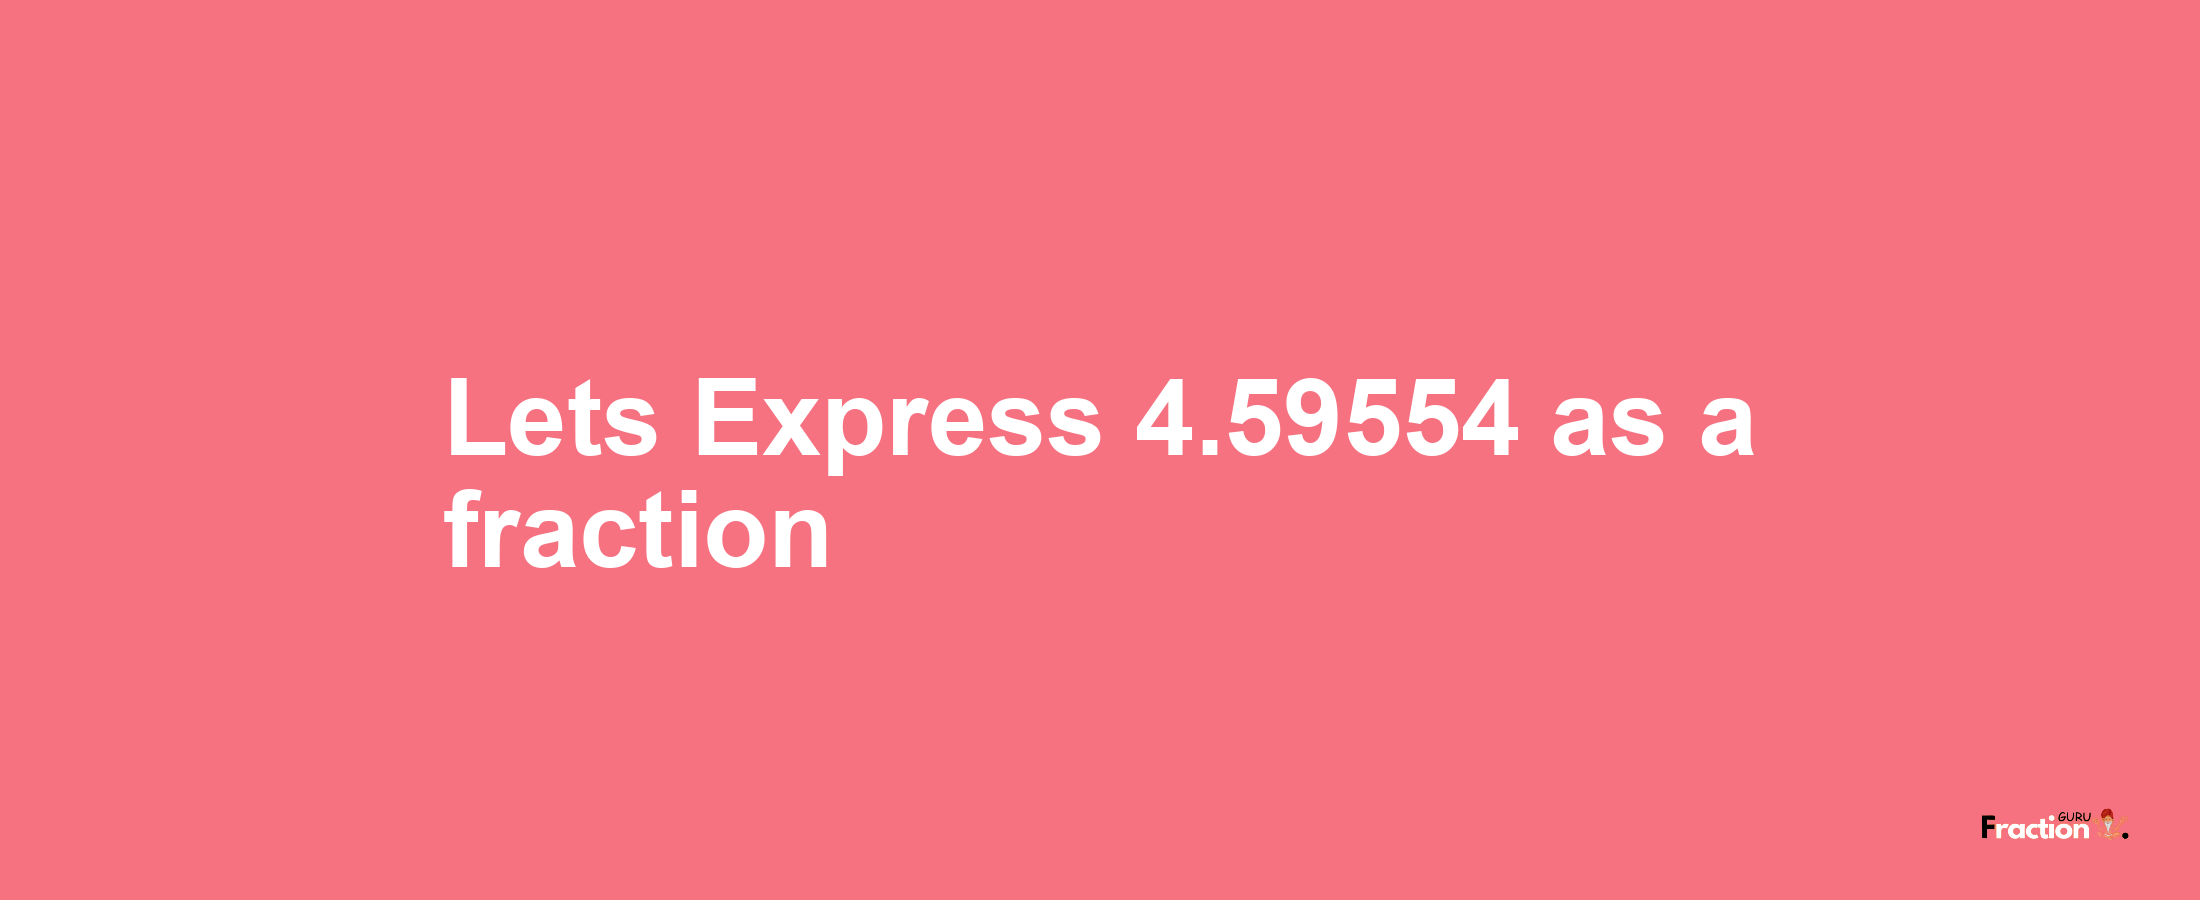 Lets Express 4.59554 as afraction